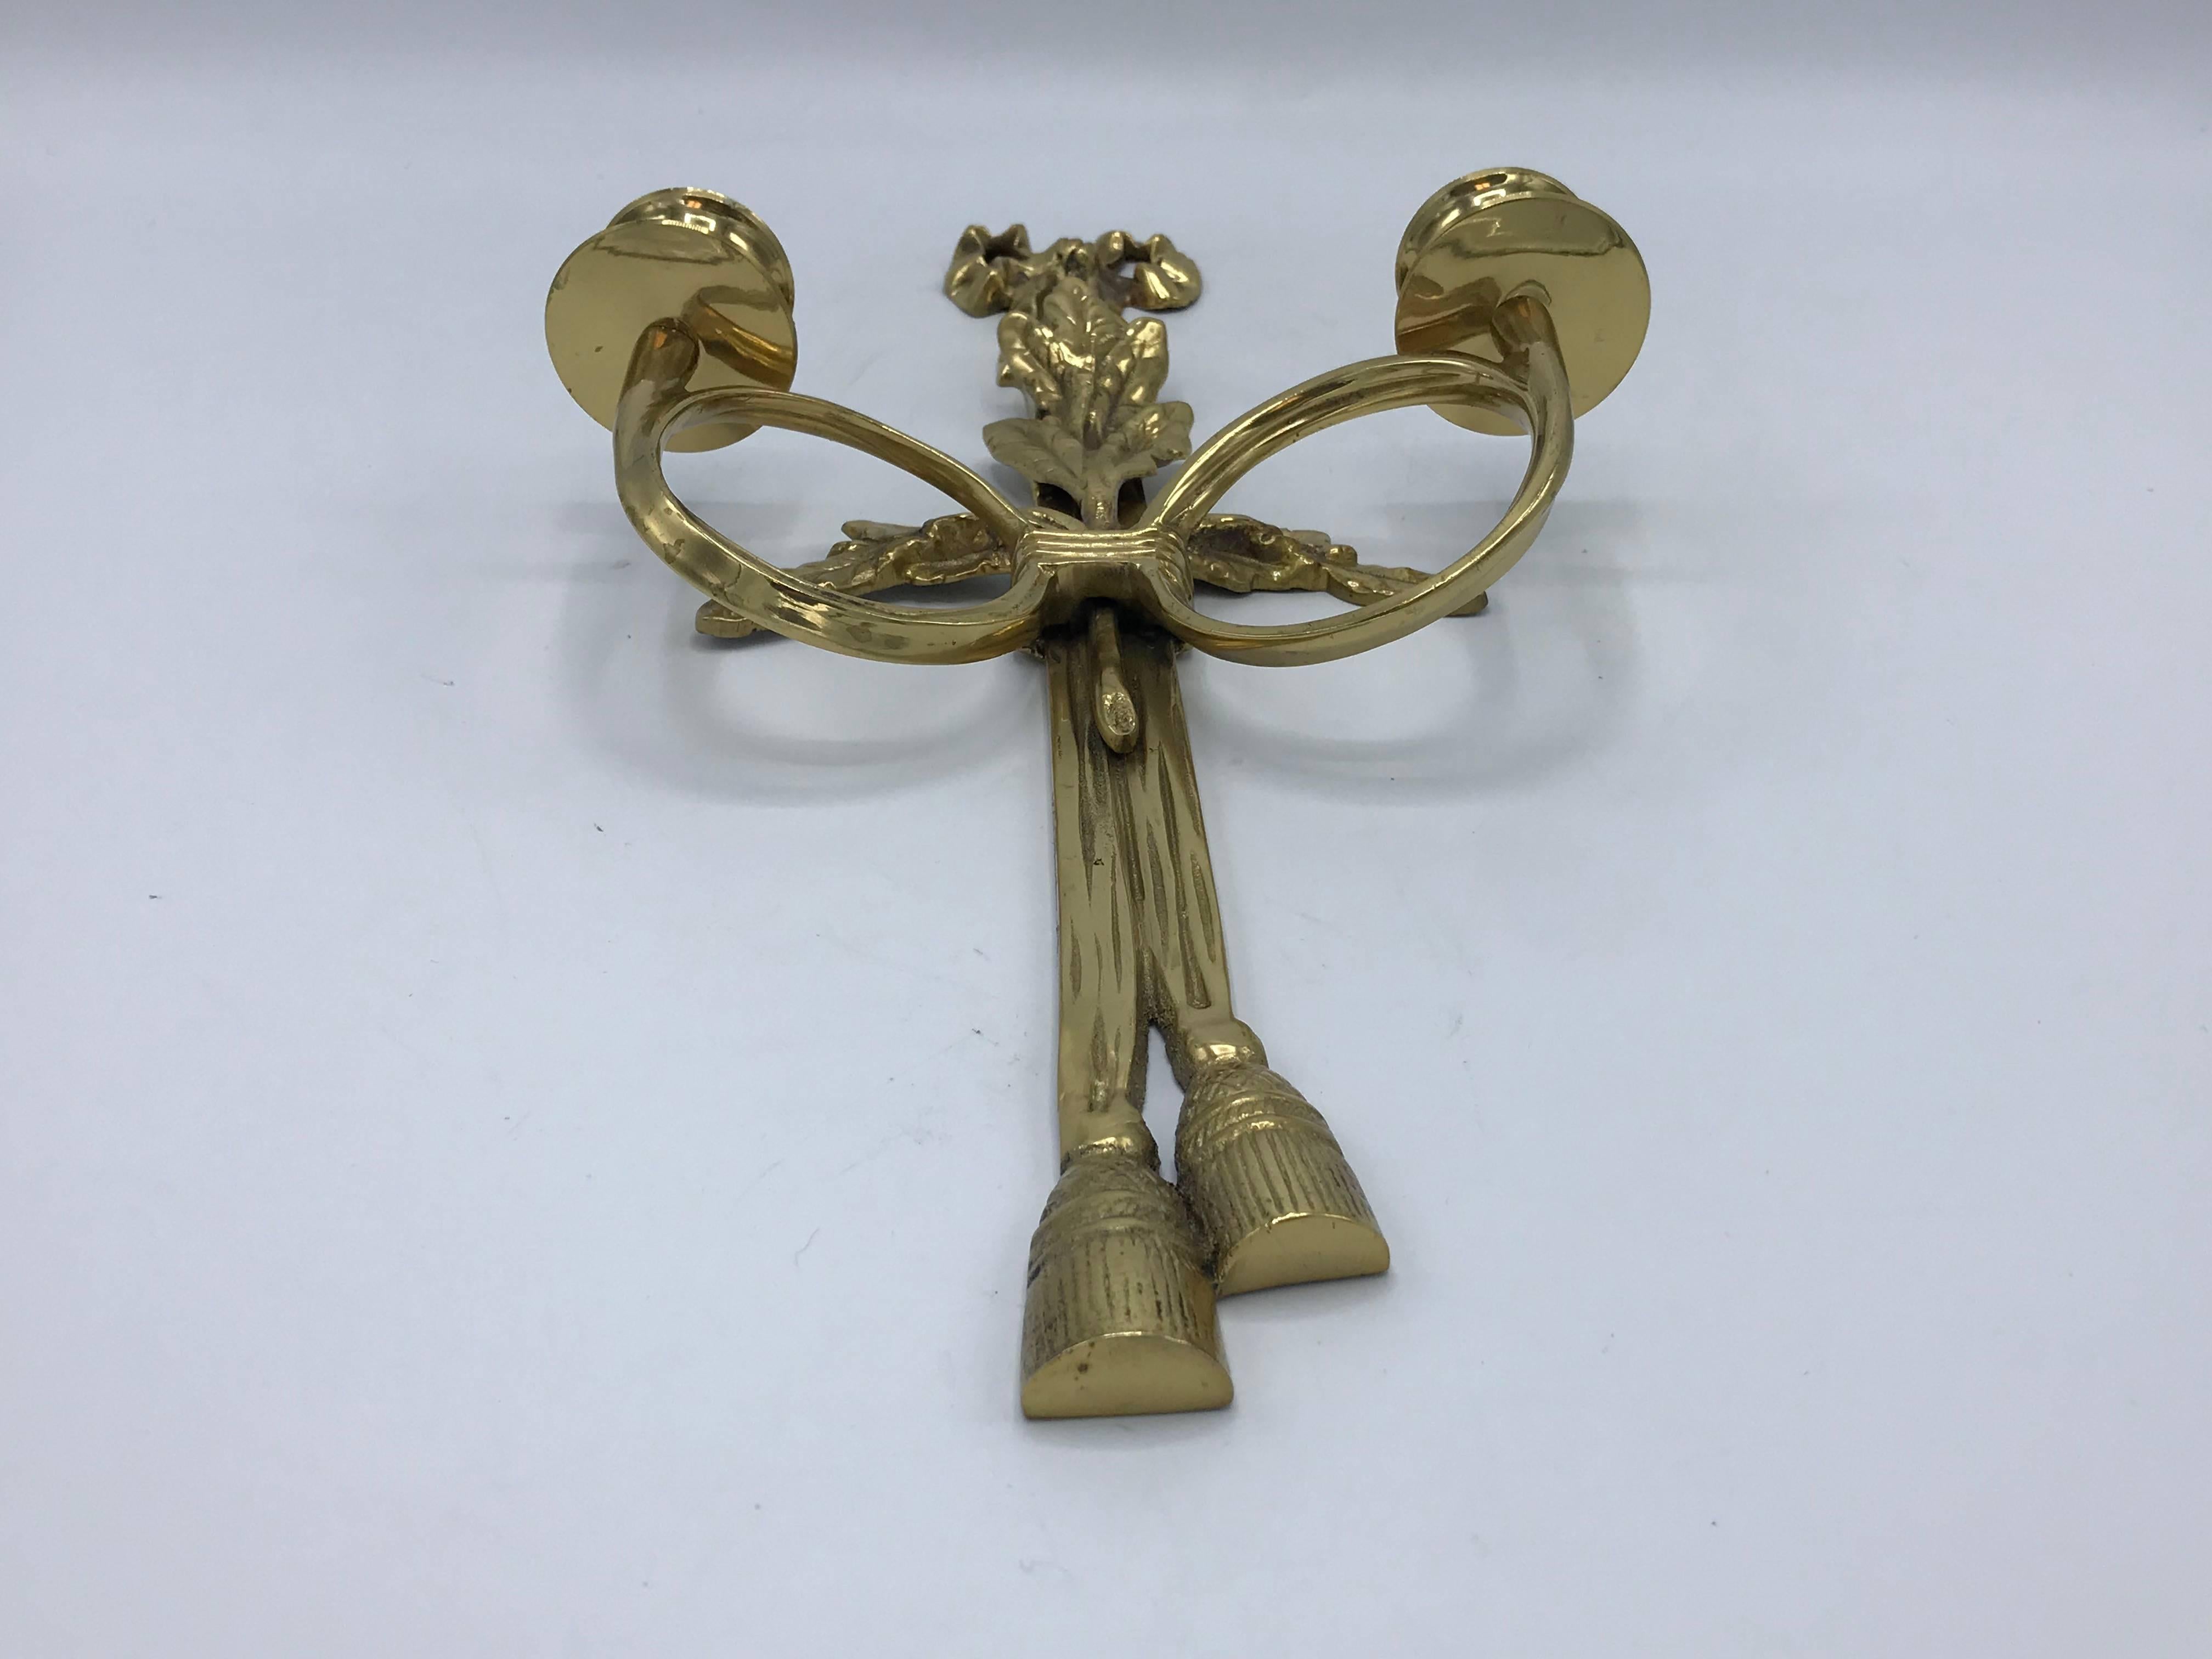 1960s Italian Brass Candlestick Sconce with Tassel and Laurel Wreath Motif, Pair 3